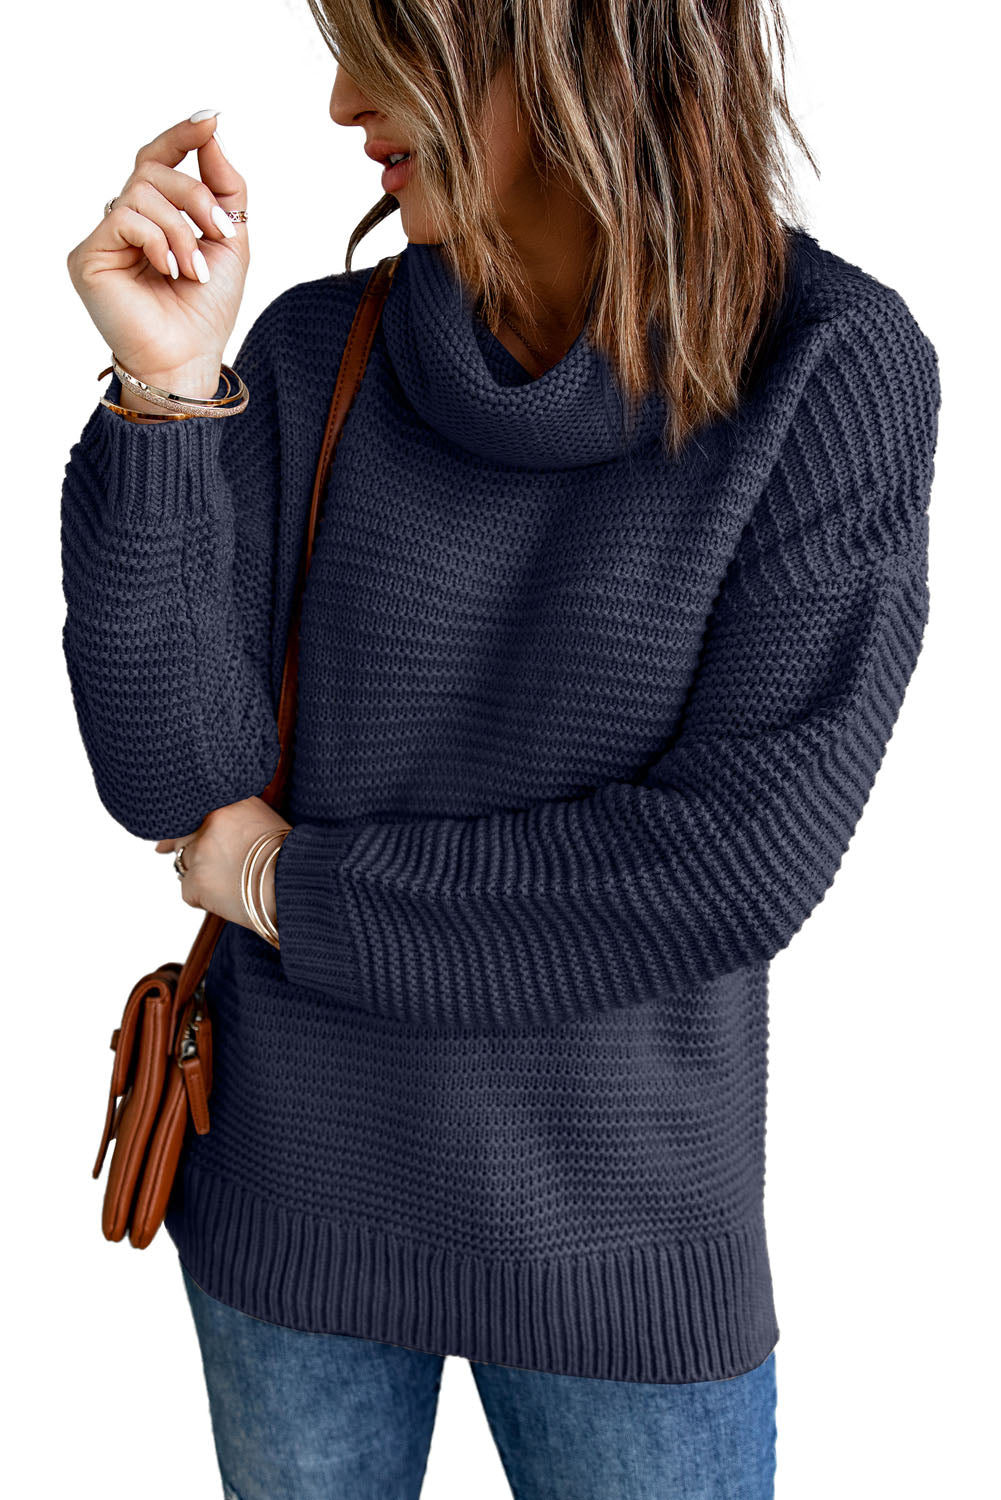 Women's Long Sleeves Turtleneck Sweater Loose Oversized Casual Sweater Pullover Top